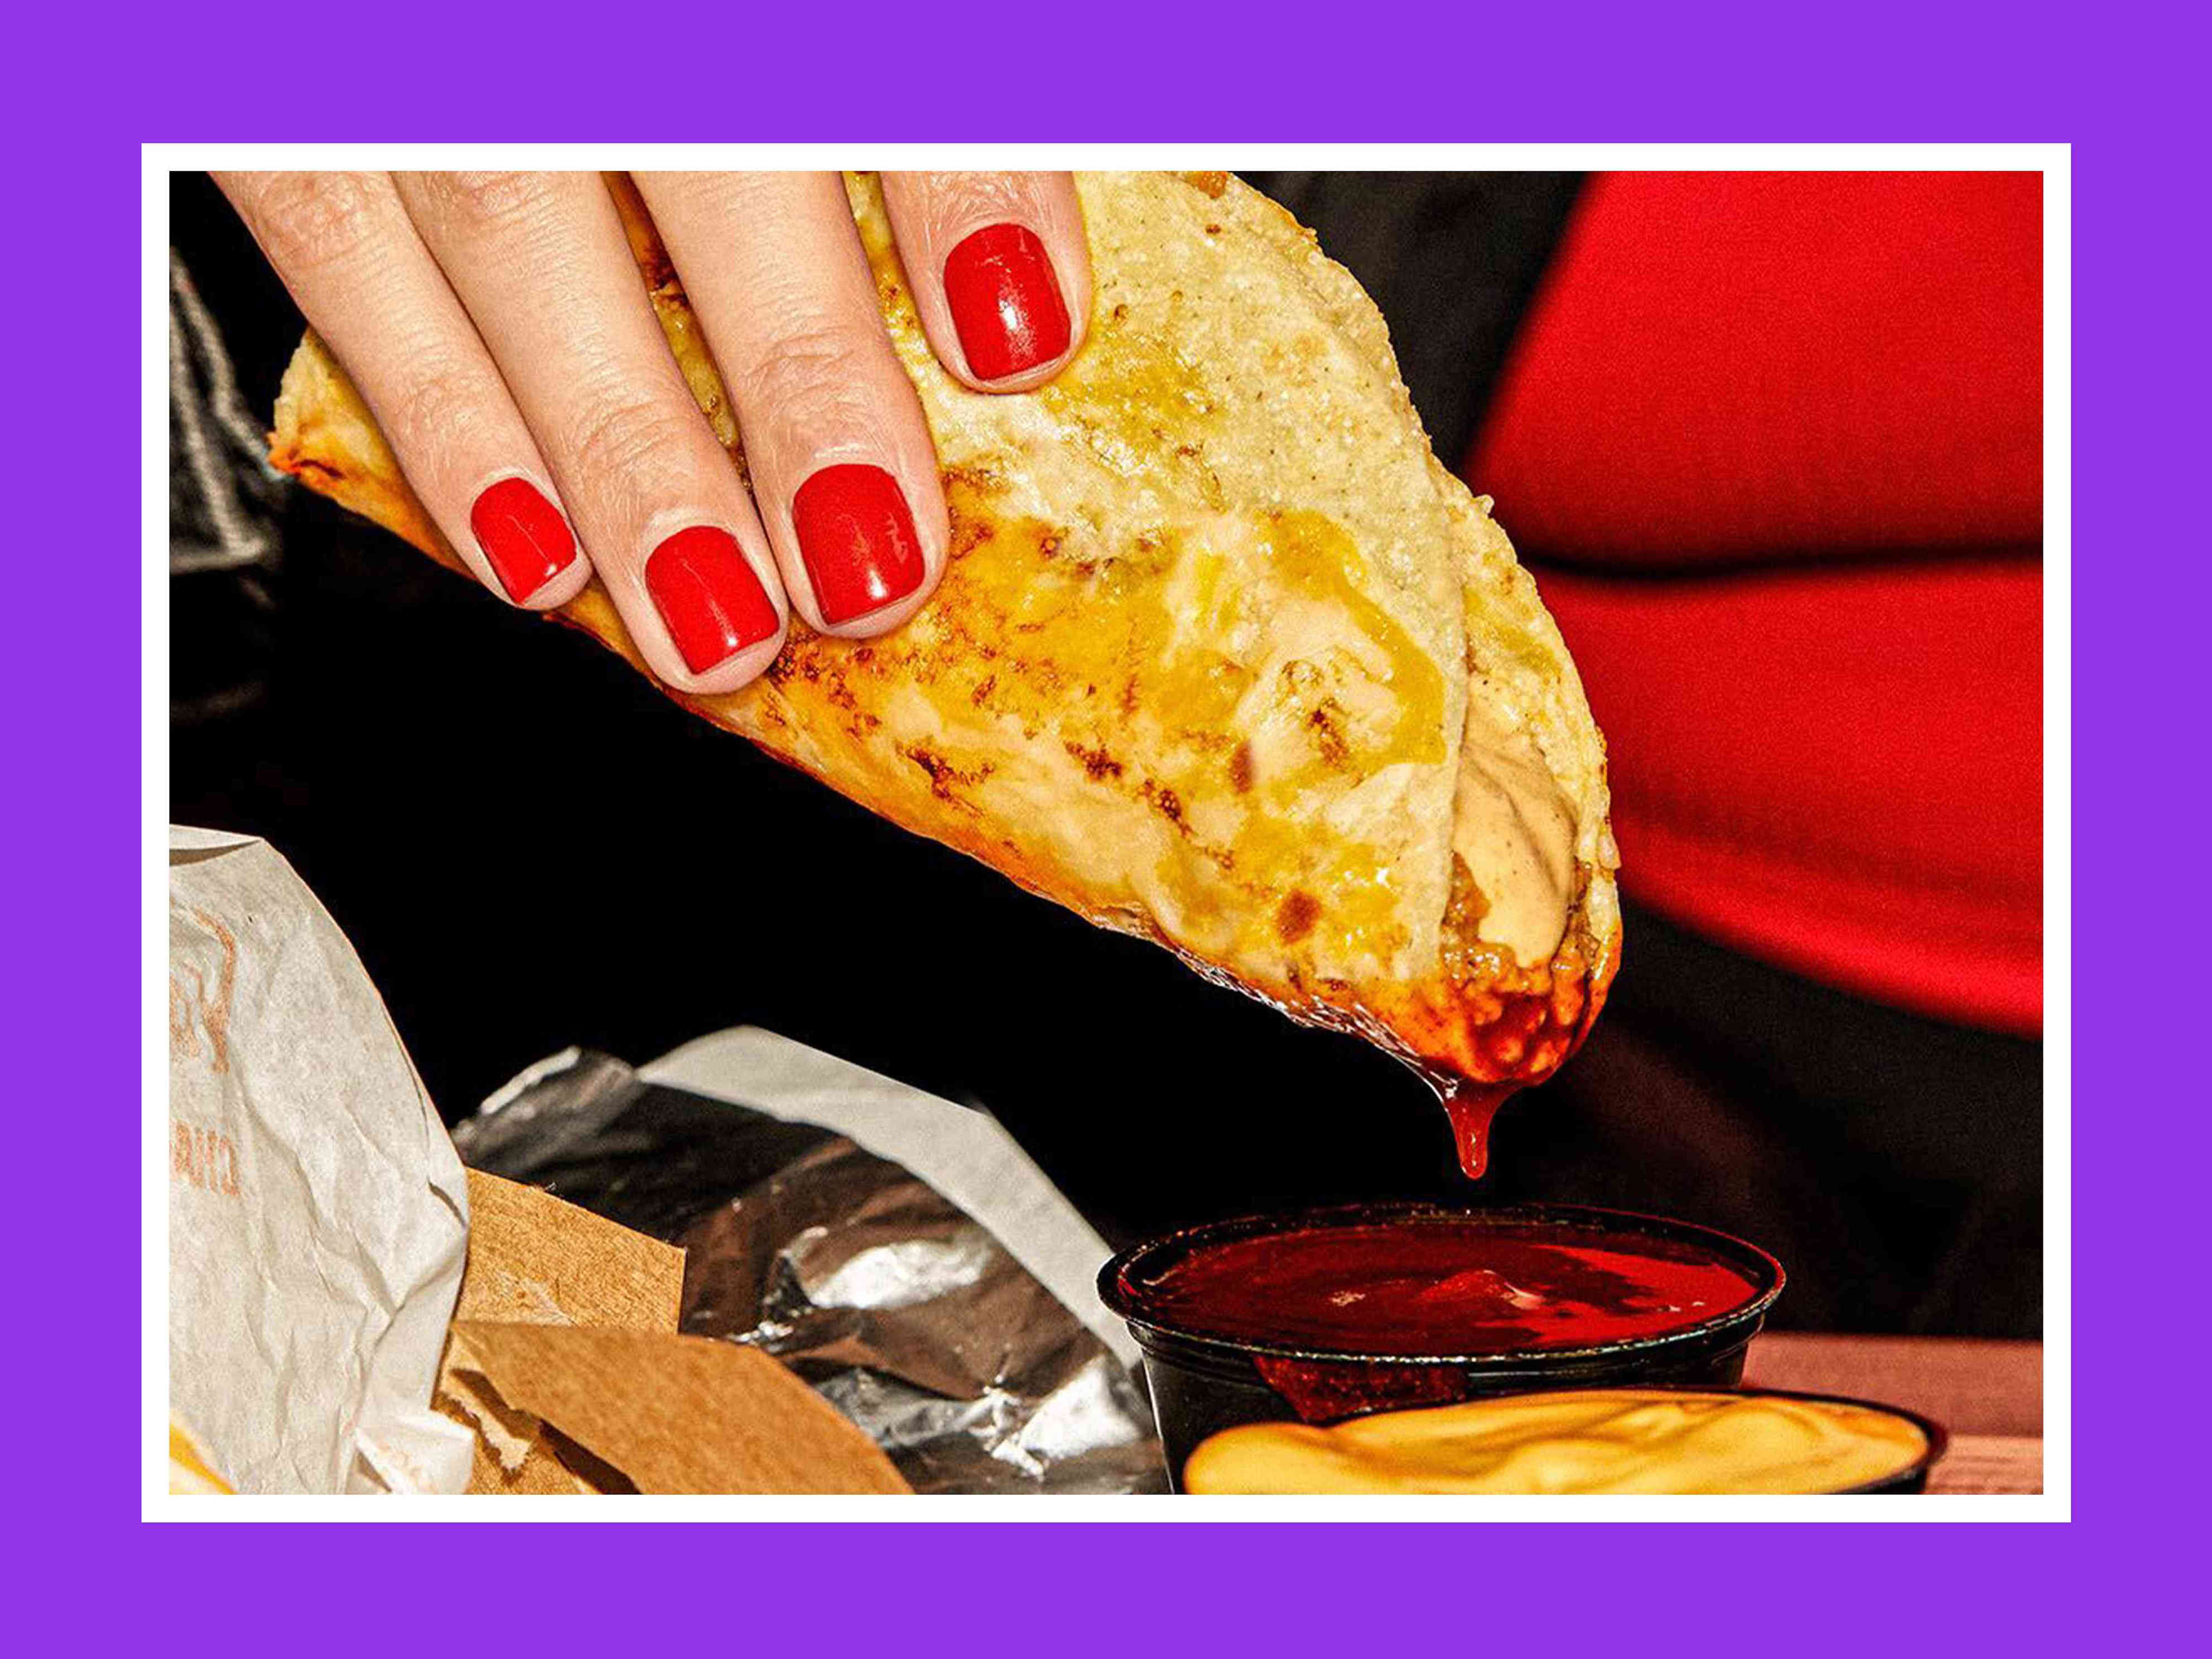 taco bell is selling tacos for $1 this weekend